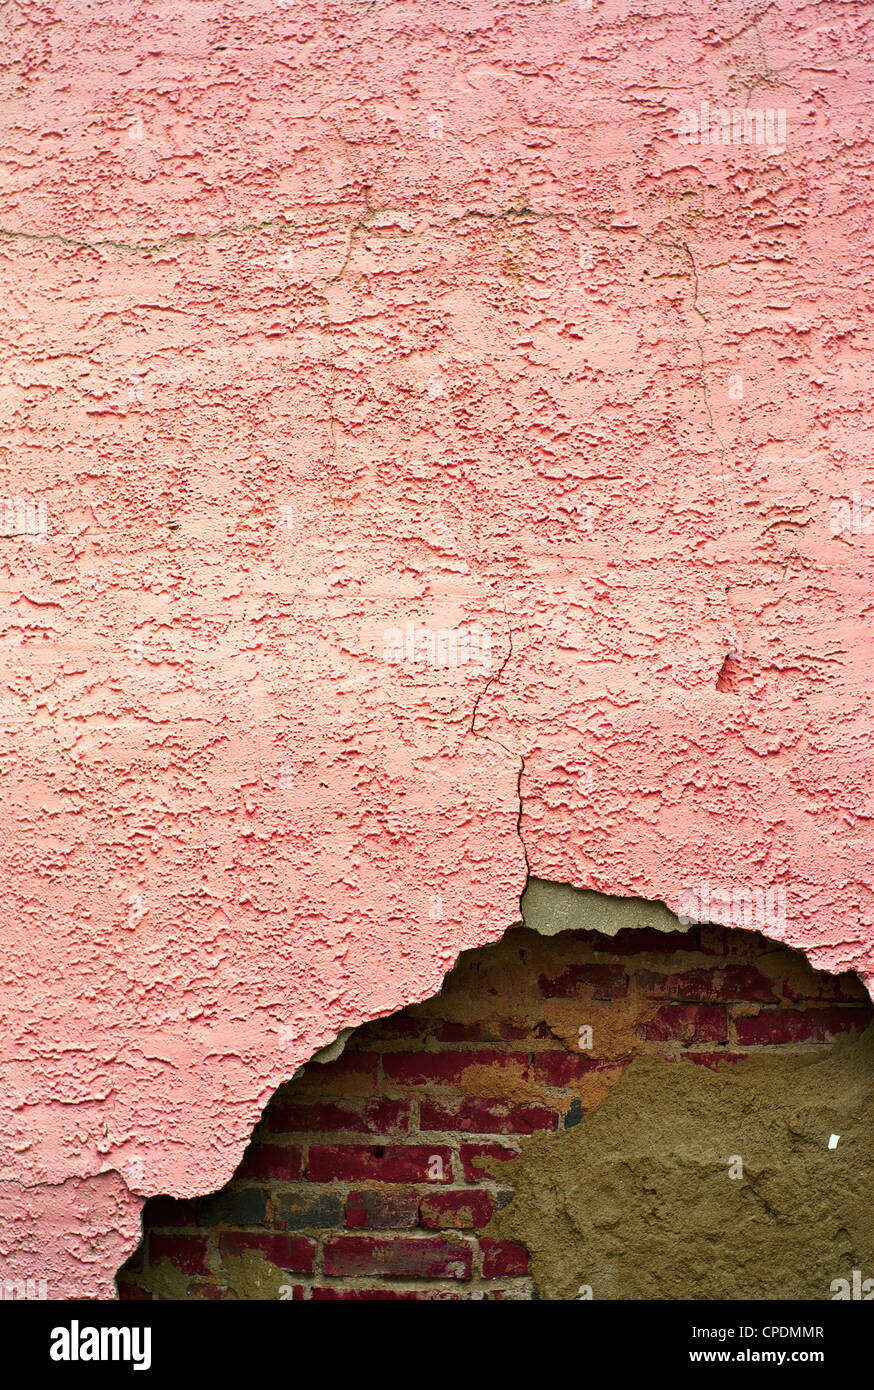 Cracked pink stucco wall revealing red brick wall behind it Stock Photo